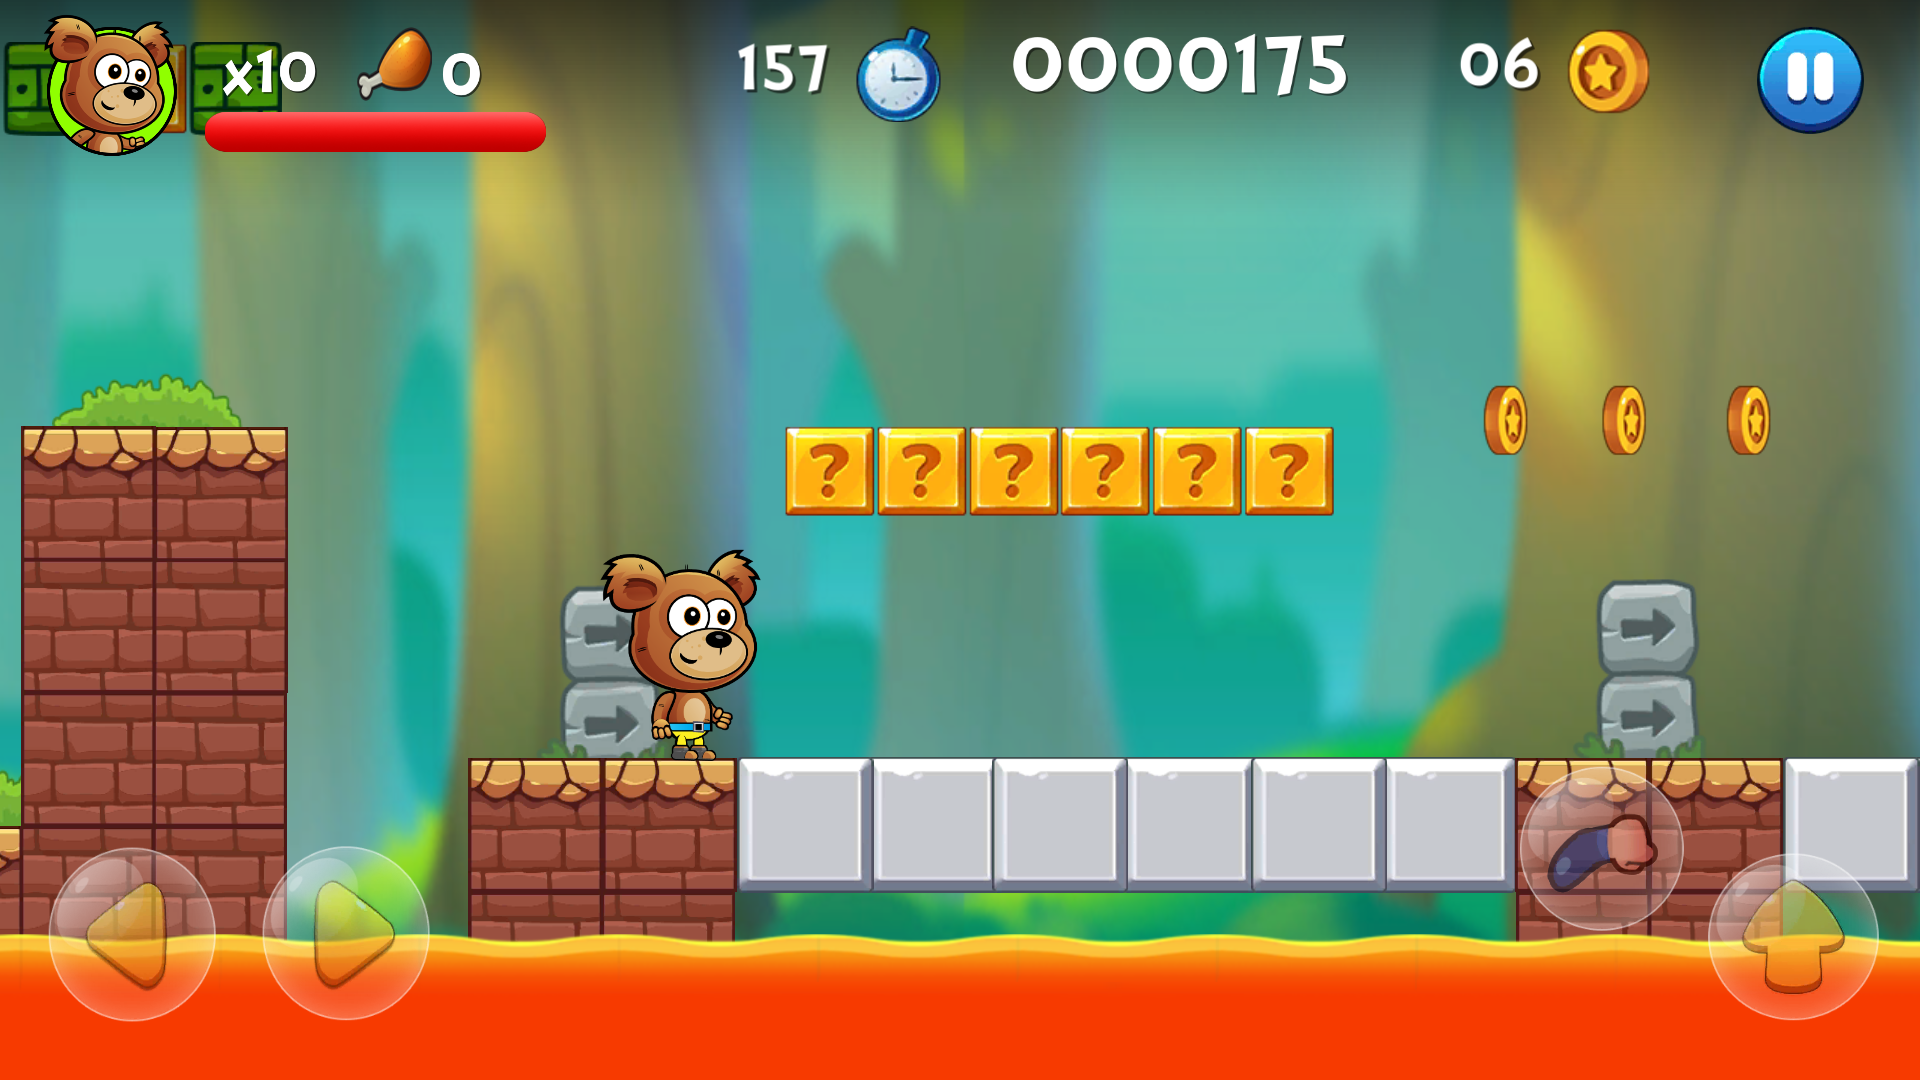 Super Bear Adventure APK (Android Game) - Free Download